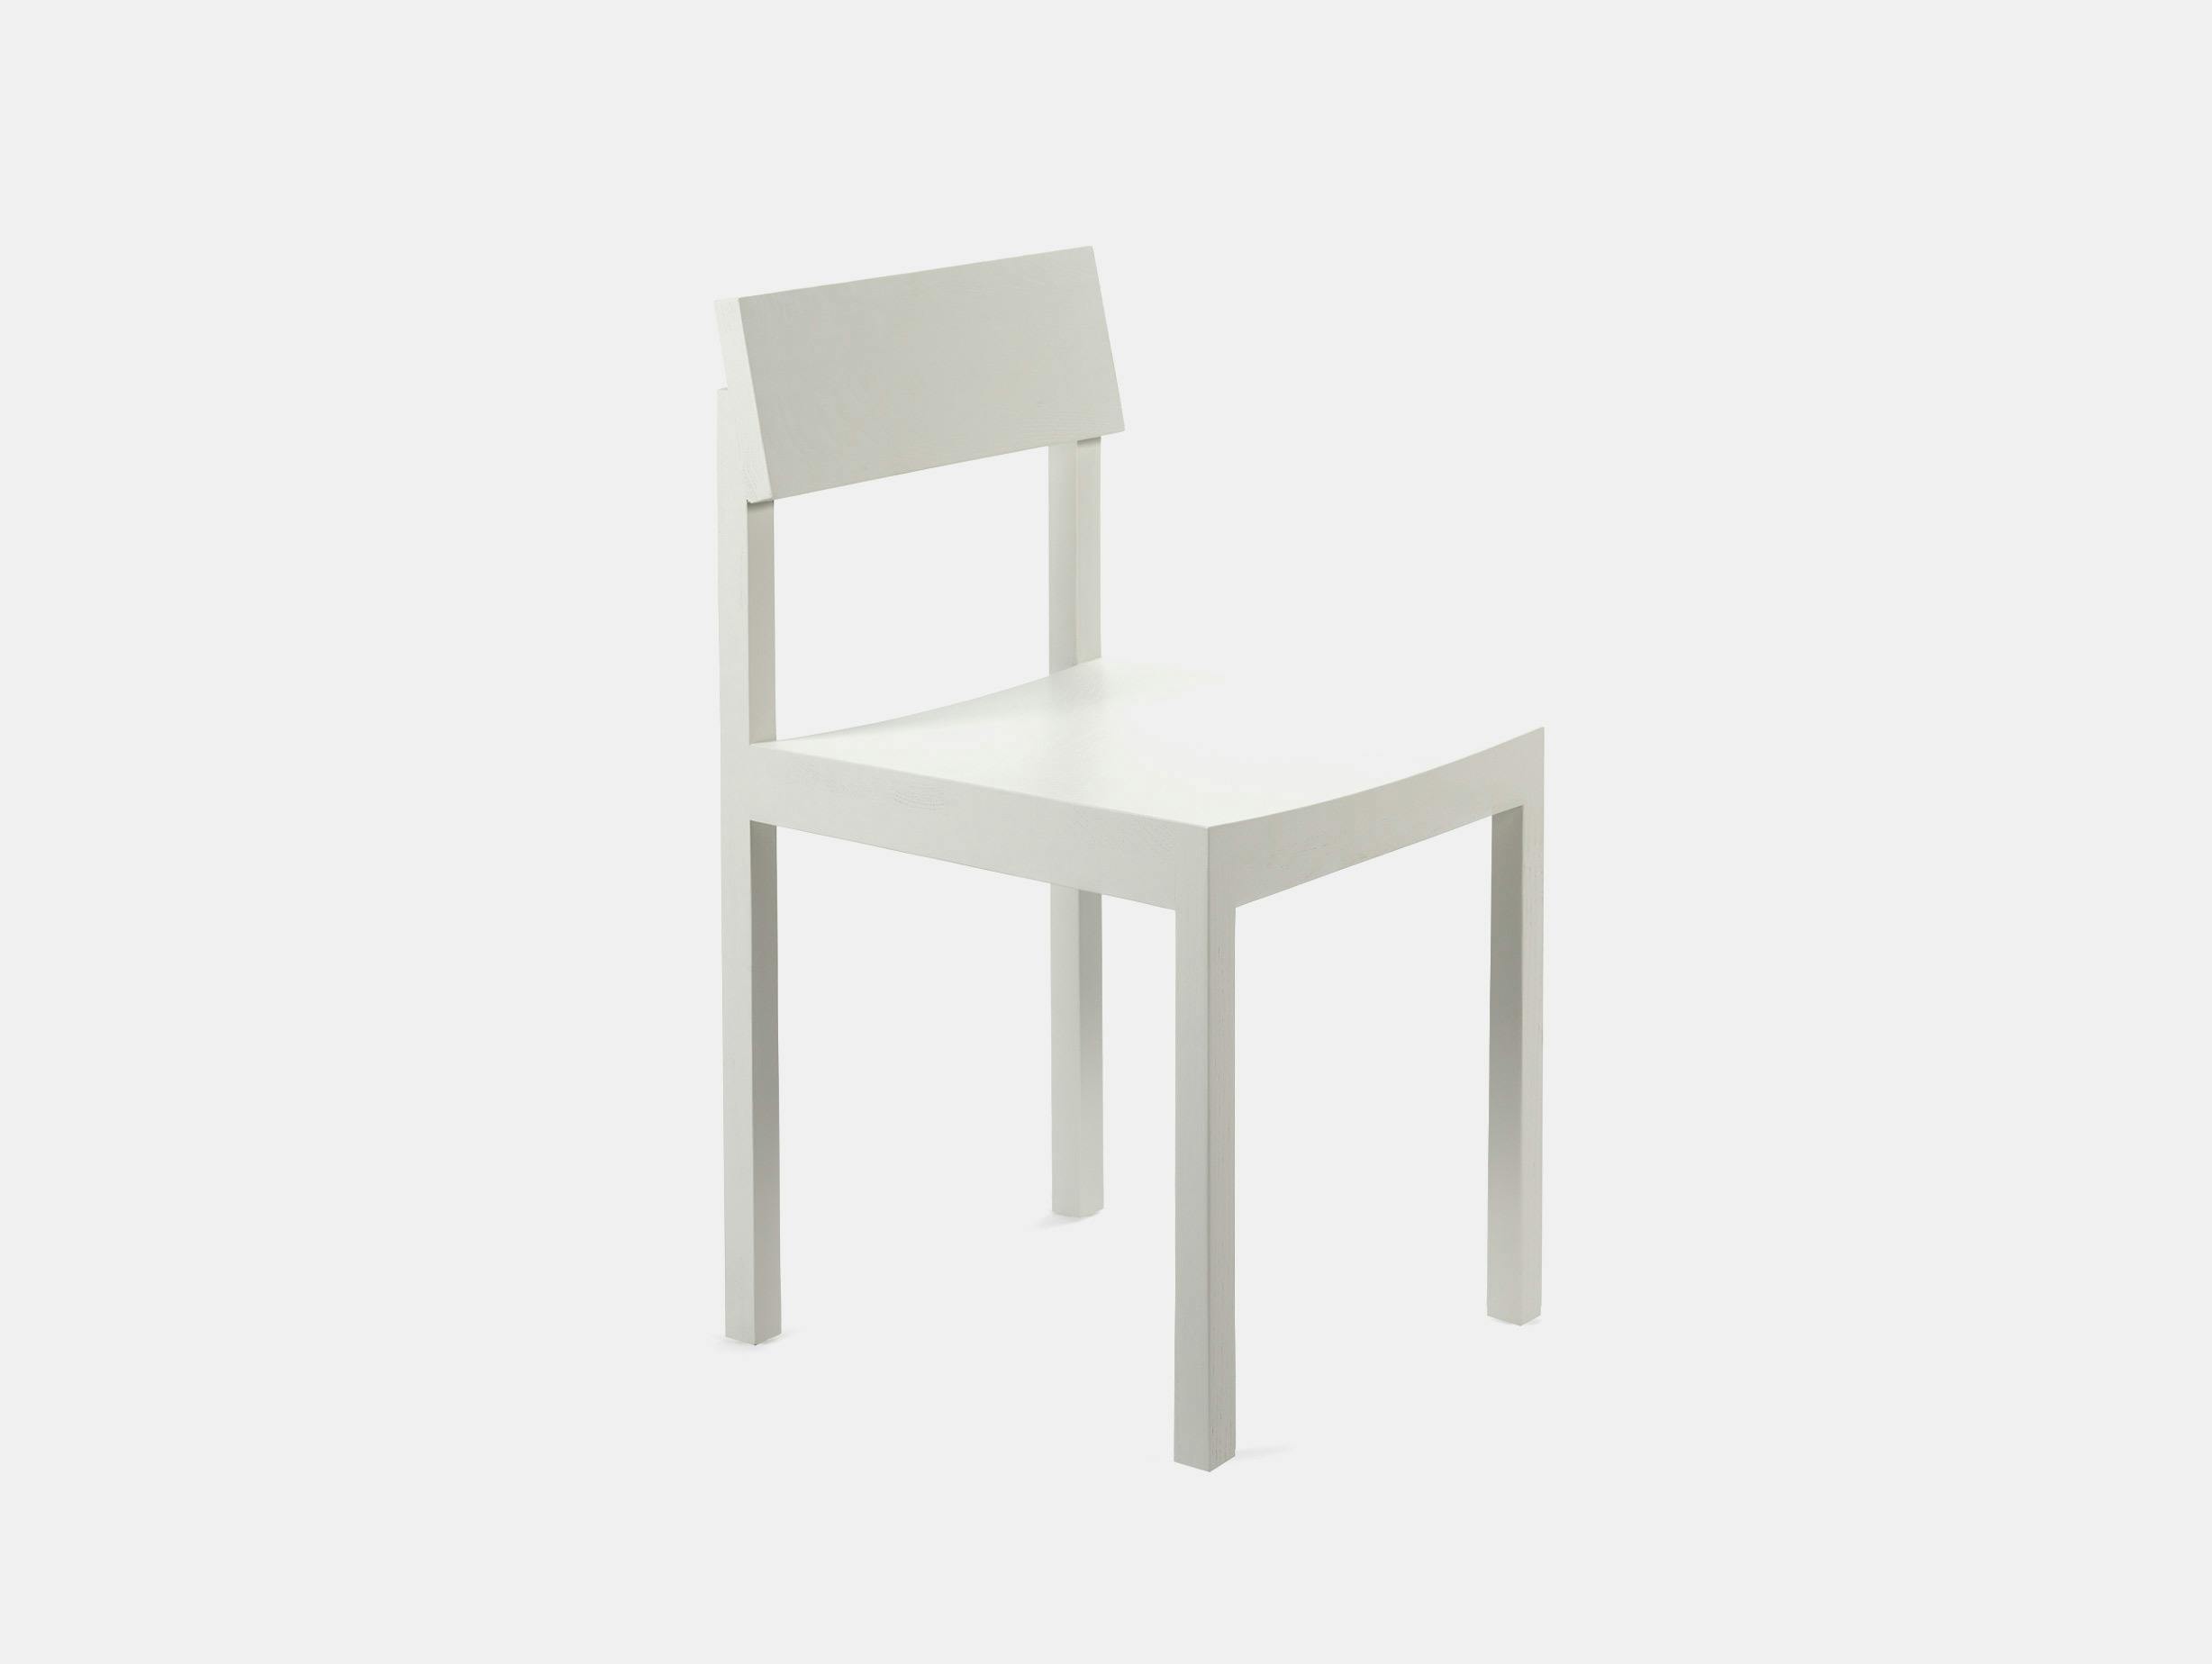 Valerie object big game silent chair chalk white